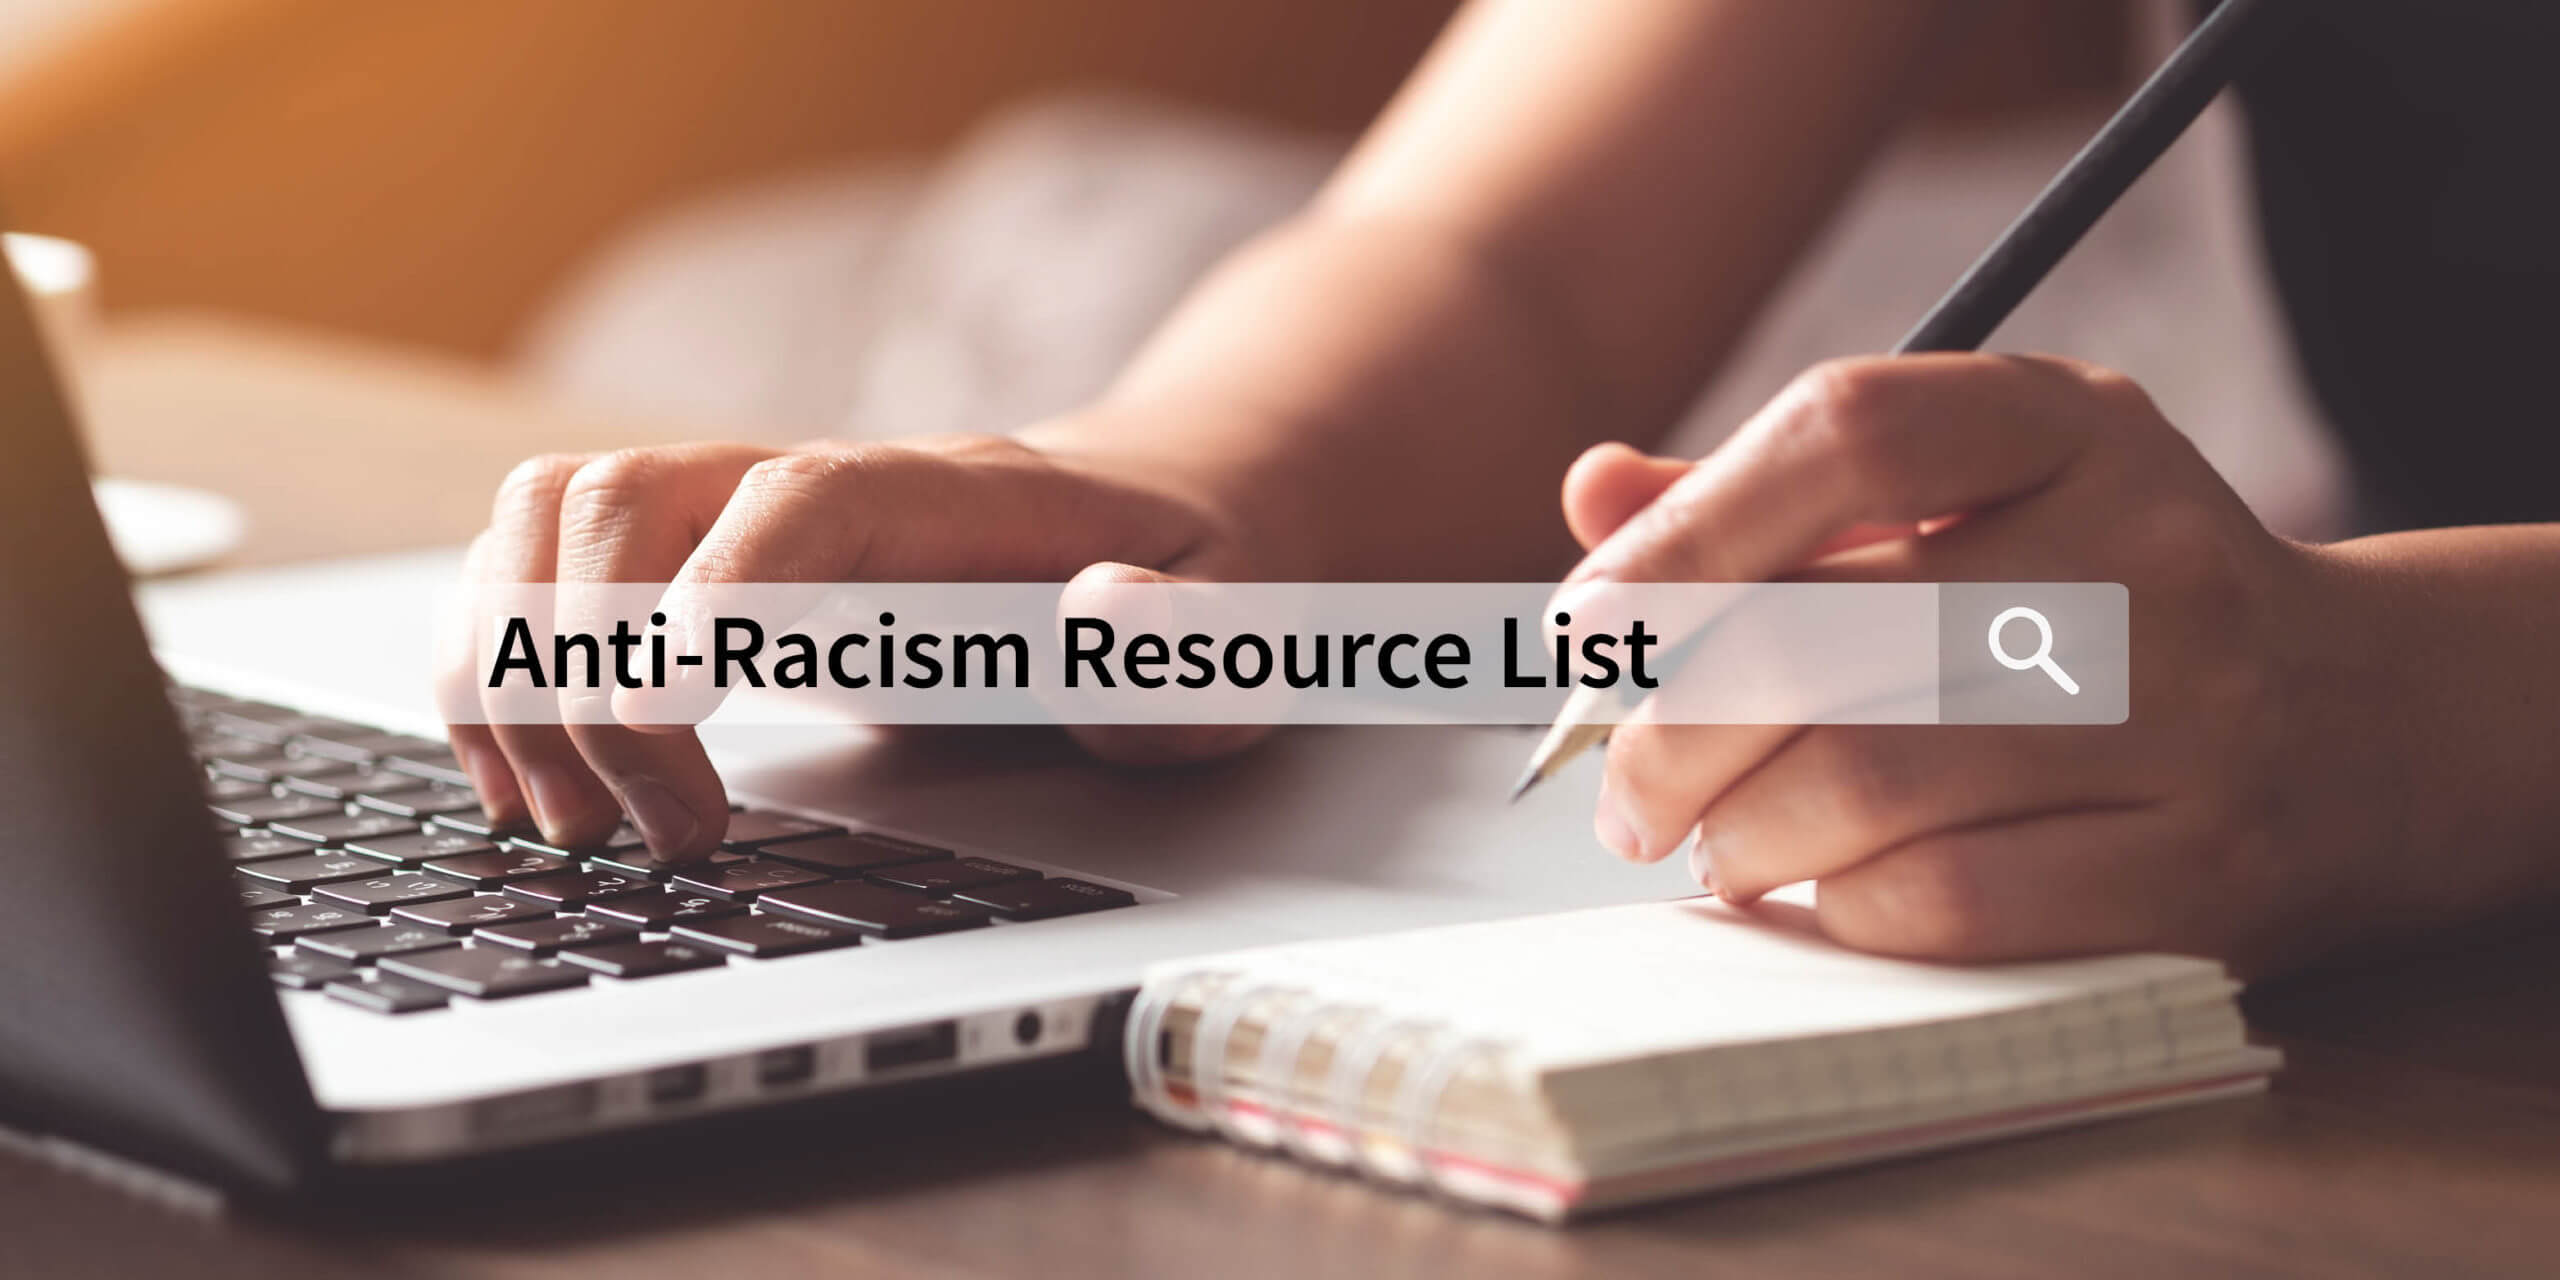 close up photo of hands typing on a keyboard and posed to take notes in a small notebook. Overlay of a search bar with the words "Anti-Racism Resource List" typed inside.